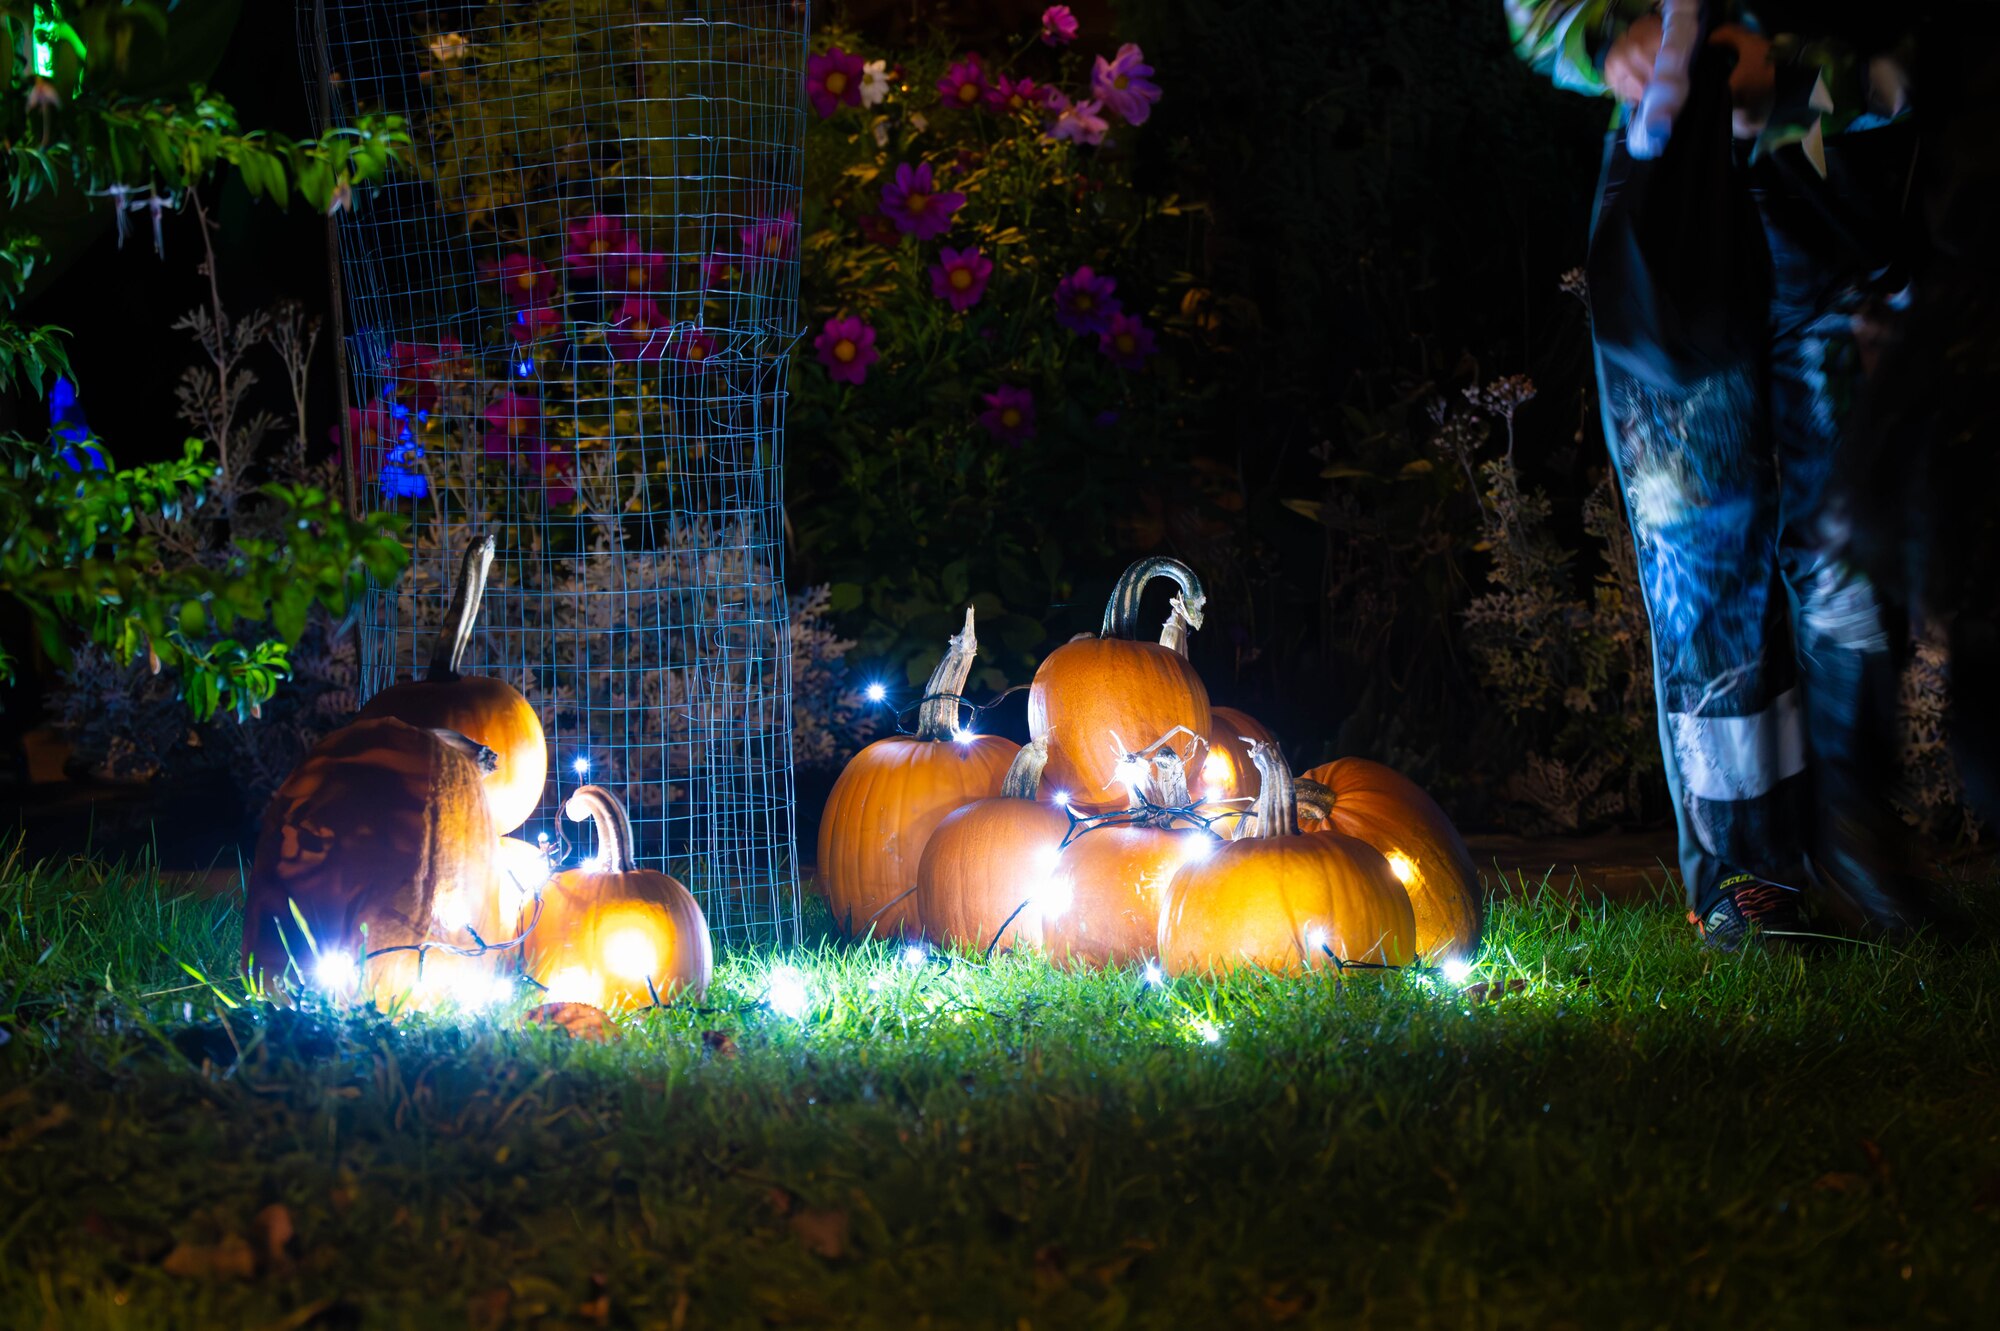 Pumpkins decorate a lawn surrounded by twinkling lights